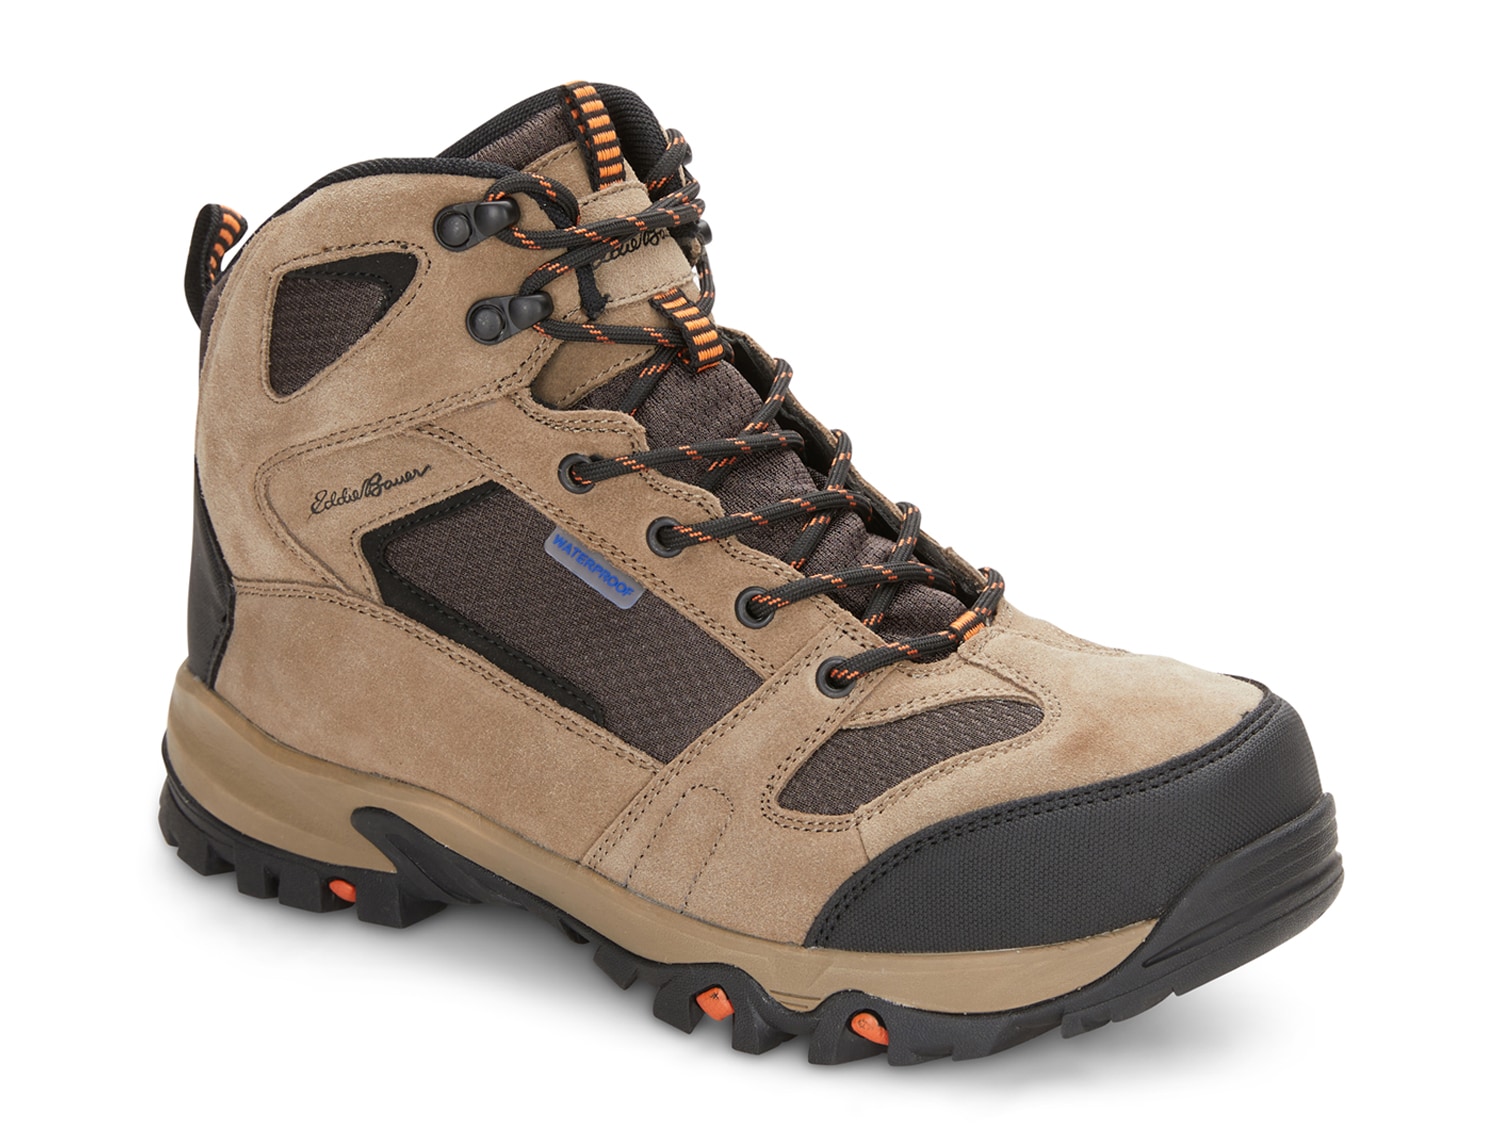 Eddie Bauer Lincoln Hiking Boot - Men's - Free Shipping | DSW